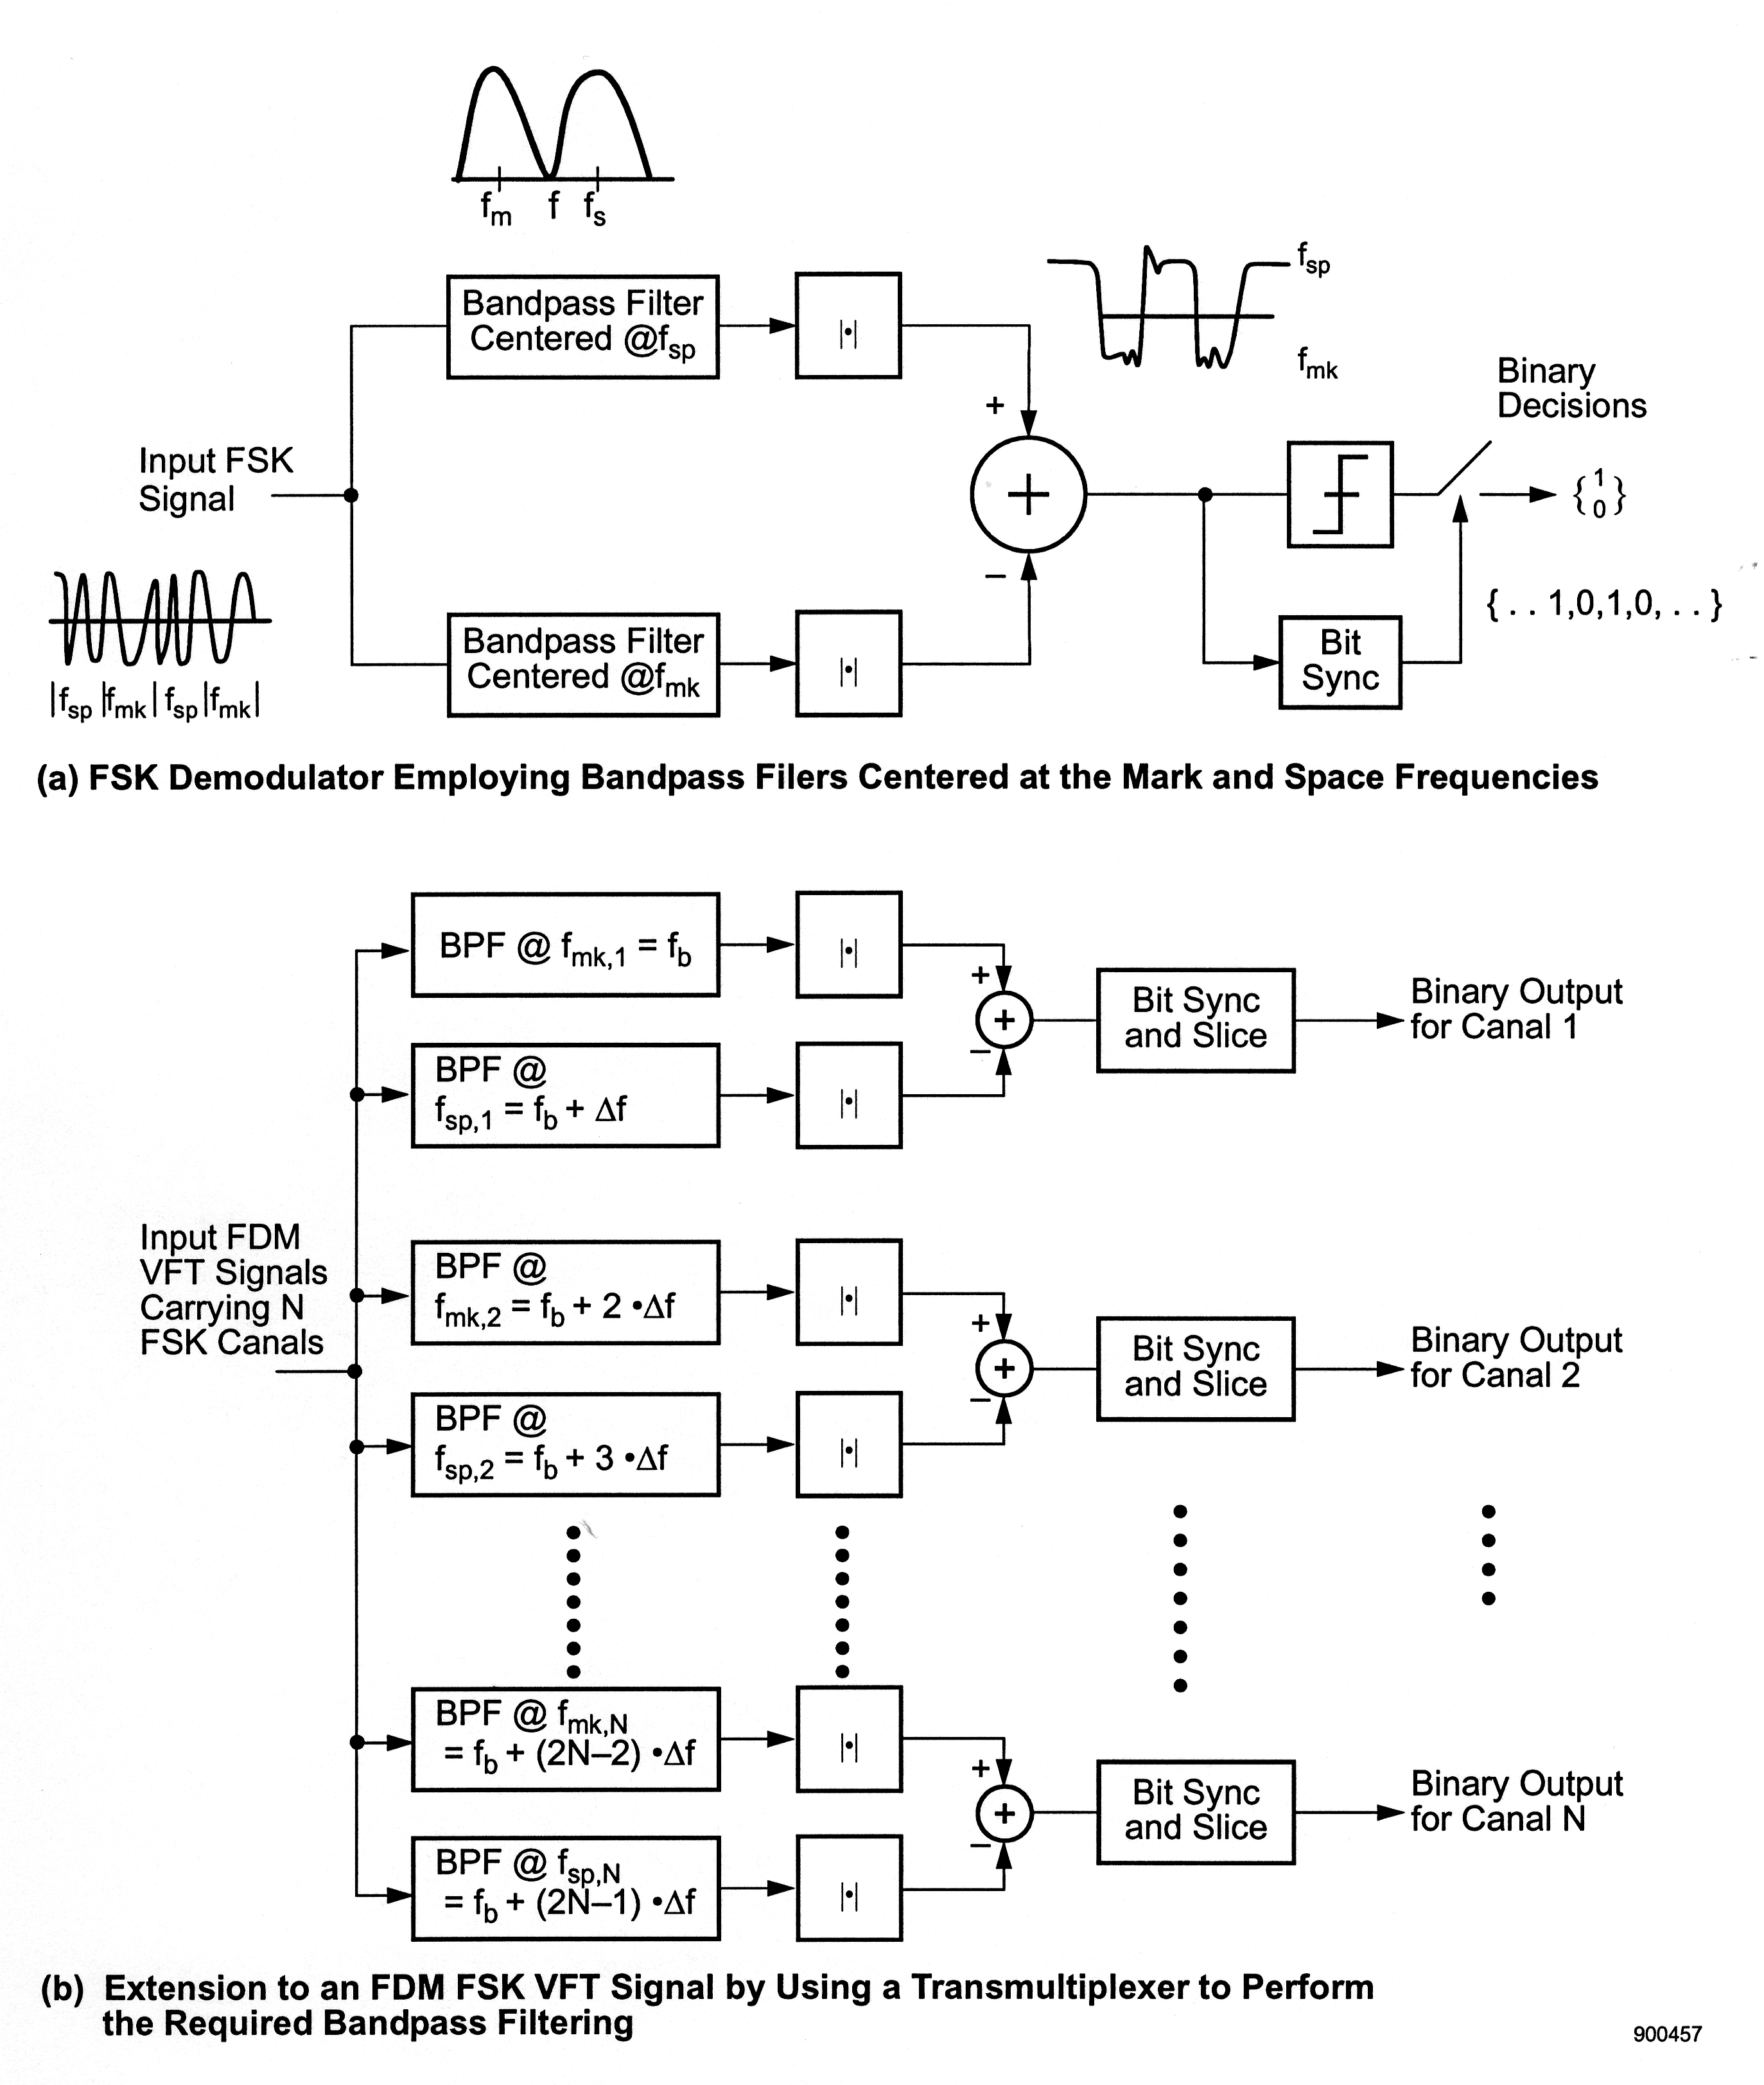 Figure one is comprised of two flow charts. Part a is titled FSK Demodulator Employing Bandpass Filters Centered at the Mark and Space Frequencies. It begins on the left side with the caption, Input FSK signal. Below and to the side are a series of waves on an arbitrary horizontal line, labeled f_sp, f_mk, f_sp, f_mk. From the first caption, a line extends up and down, then to the right towards two rectangles. The upper rectangle is titled Bandpass Filter Centered @f_sp. The lower rectangle is titled Bandpass Filter Centered @f_mk. Above the upper rectangle is a small graph of two waves that begin and end along a horizontal axis, labeled f, and have peaks and the labeled points f_m on the left and f_s on the right. Both rectangles continue with an arrow pointing to the right at two more rectangles containing the caption |⋅|. After this are two arrows from these rectangles both pointing at the same circle in the middle, containing a large plus sign. The arrow from the upper row of rectangles is labeled with a +, and the arrow from the bottom row is labeled with a -. To the right of the circle is a line pointing at another rectangle, containing a large f-shaped line intersection. In the middle of this connecting line to the rectangle is an arrow pointing downward at another rectangle titled Bit Sync. This rectangle is followed by another arrow pointing back up towards the rectangle containing the f-shape, with the arrow labeled {. . 1, 0, 1, 0, . . .}. To the right of the f-shaped rectangle is one arrow pointing directly to the right, labeled {1 0}, and one pointing up and to the right, labeled Binary Decisions. Above both rectangles is a graph containing a wavering graph about a horizontal axis, with the positive portion of the graph labeled f_sp, and the lower portion labeled f_mk. Part b is titled Extension to an FDM FSK VFT Signal by Using a Transmultiplexer to Perform the Required Bandpass Filtering. The left side begins with the title Input FDM VFT Signals Carrying N FSK Canals. This caption is followed by a flowchart that spreads out to six rows. These rows begin with rectangles that read from top to bottom, BPF @ f_mk, 1 = f_b, BPF @ f_sp, 1 = f_b + ∆f, BPF @ f+mk, 2 = f_b + 2 ⋅ ∆f, BPF @ f_sp, 2 = f_b + 3 ⋅ ∆f, BPF @ f_mk, N = f_b + (2N-2) ⋅ ∆f, BPF @ f_sp, N = f_b + (2N-1) ⋅ ∆f. In between the fourth and fifth rectangles are a series of vertical dots indicating a continuing series. To the right of these rectangles aligned in their rows are six more rectangles each containing the caption |⋅|. In groups of two, the adjacent rectangle rows meet together at a circle containing a +. The arrows leading to this circle from the rectangles are labeled + above and - below. To the right of these circles are three rectangles labeled Bit Sync and Slice. To the right of these are arrows pointing to the right at captions that read from top to bottom, Binary Output for Canal 1, Binary Output for Canal 2, and Binary Output for Canal N.